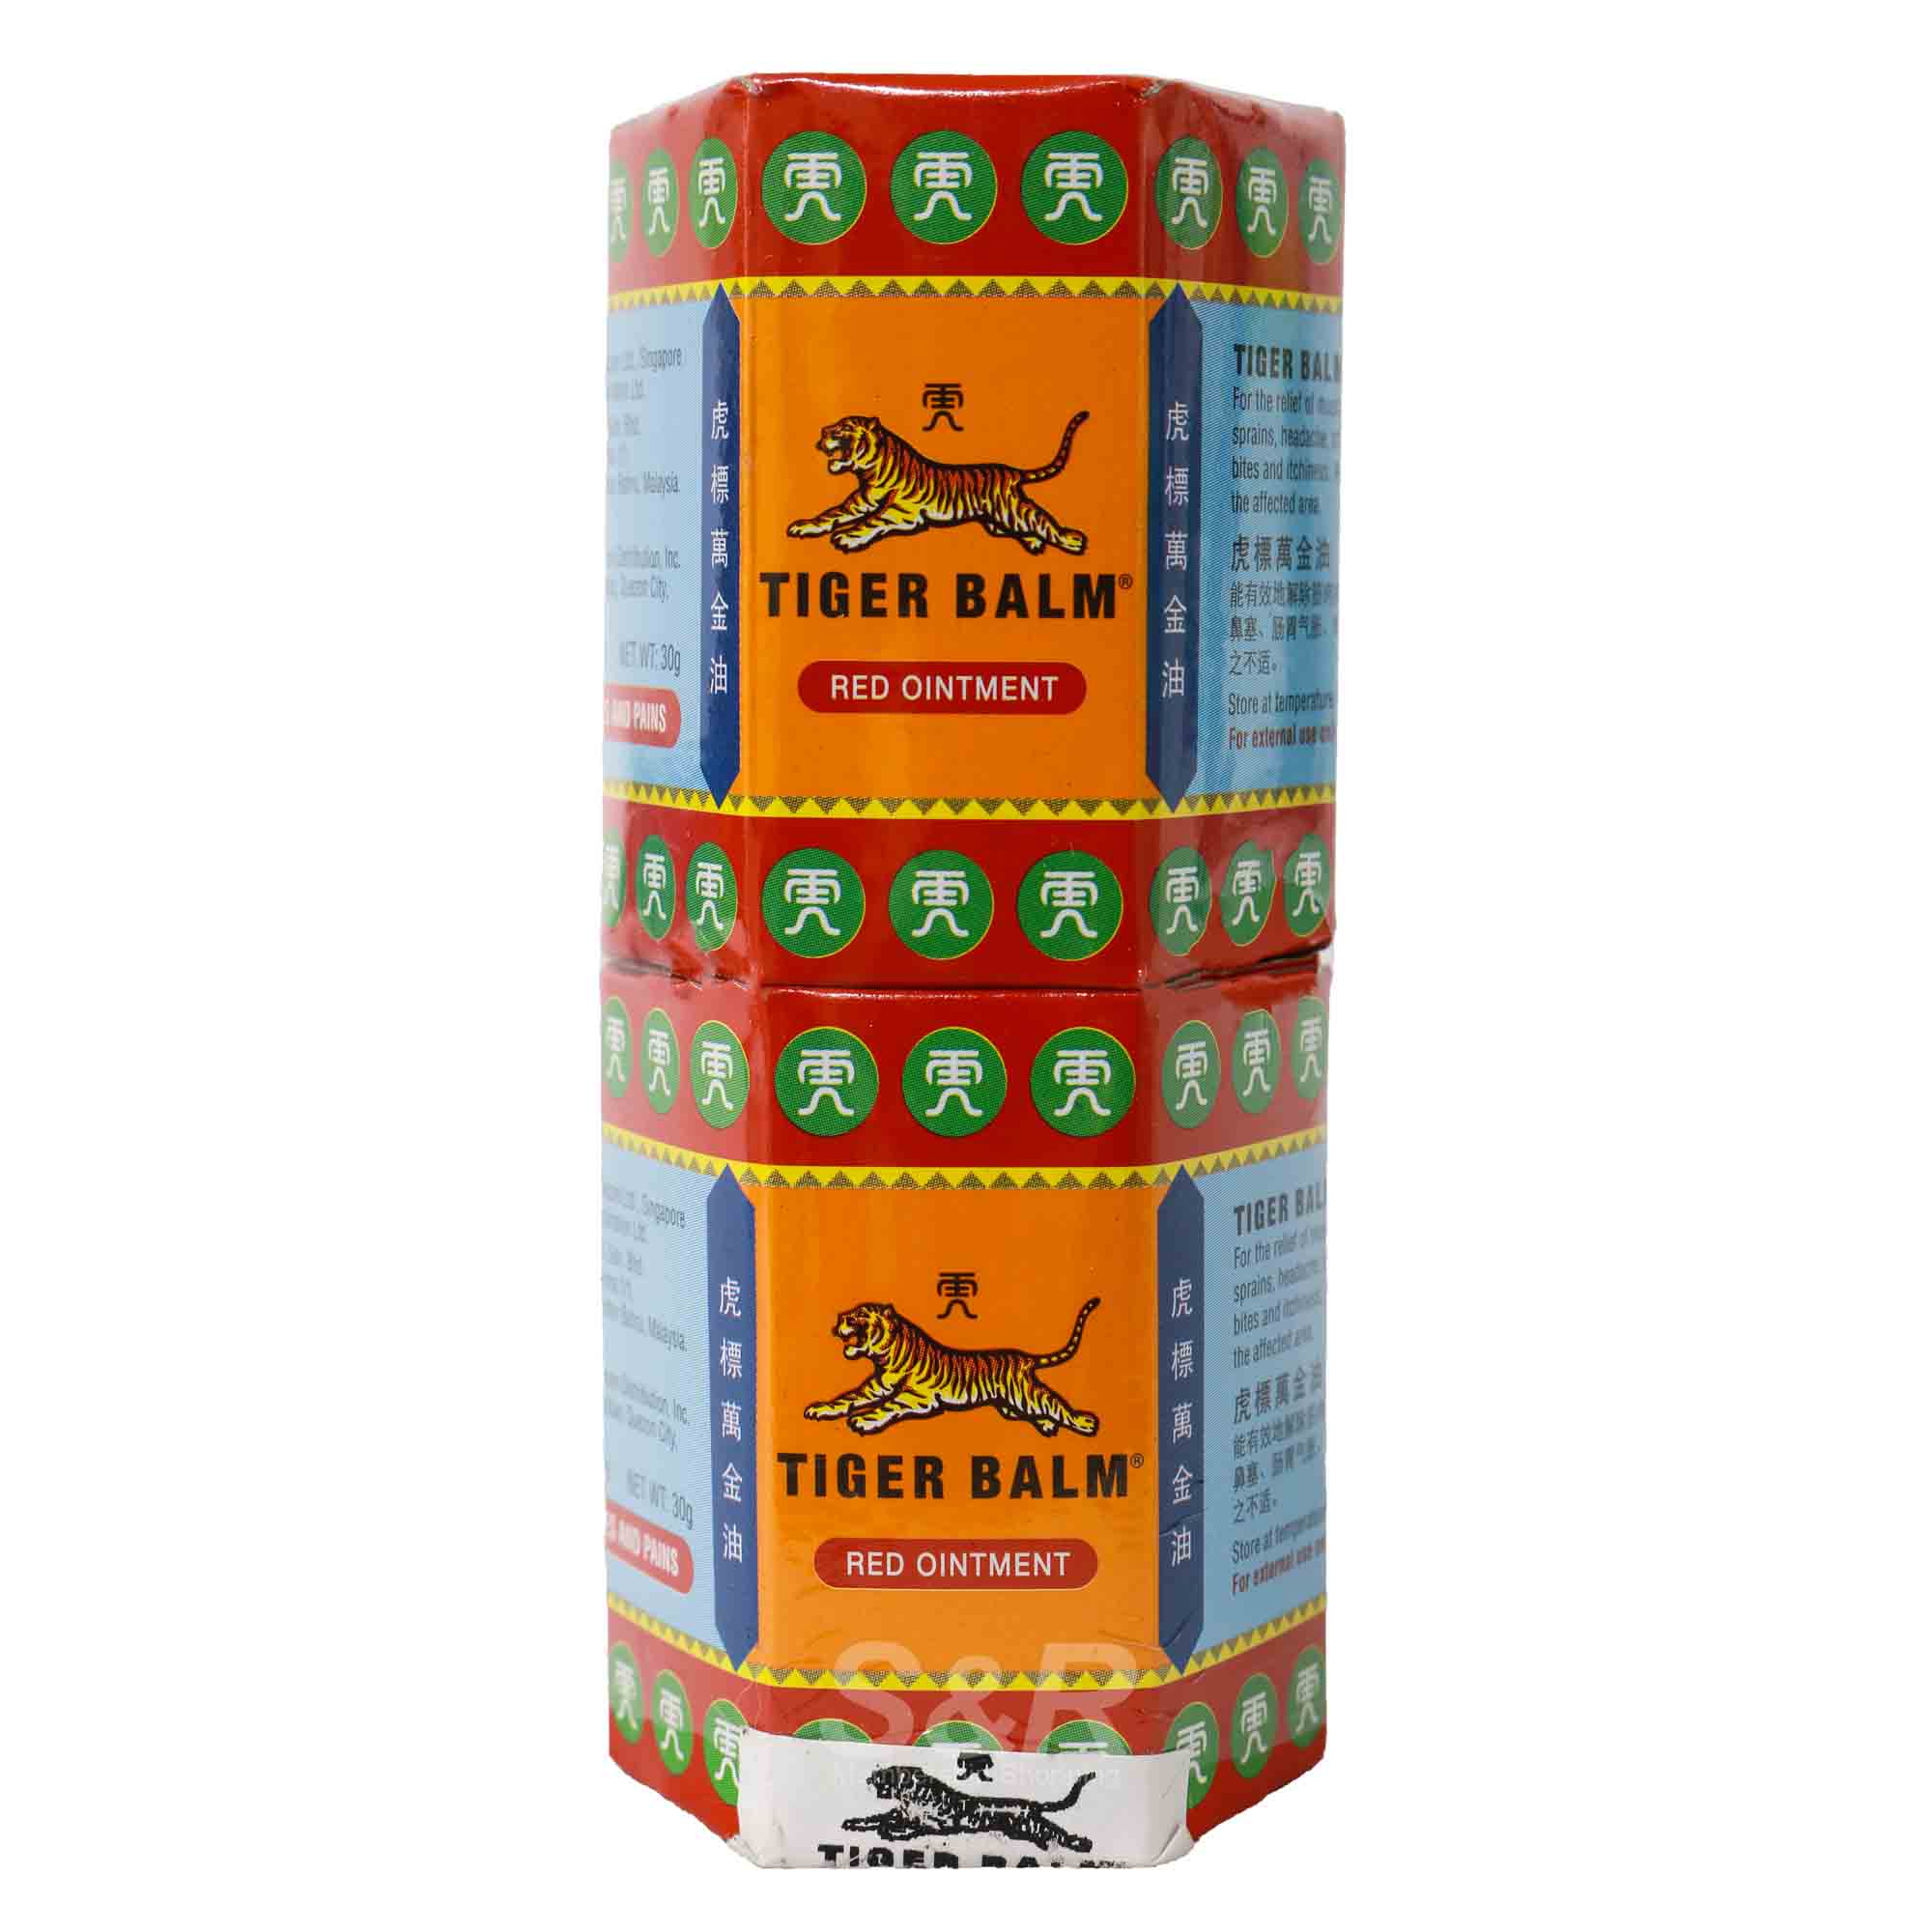 Tiger Balm Red Ointment 2pcs